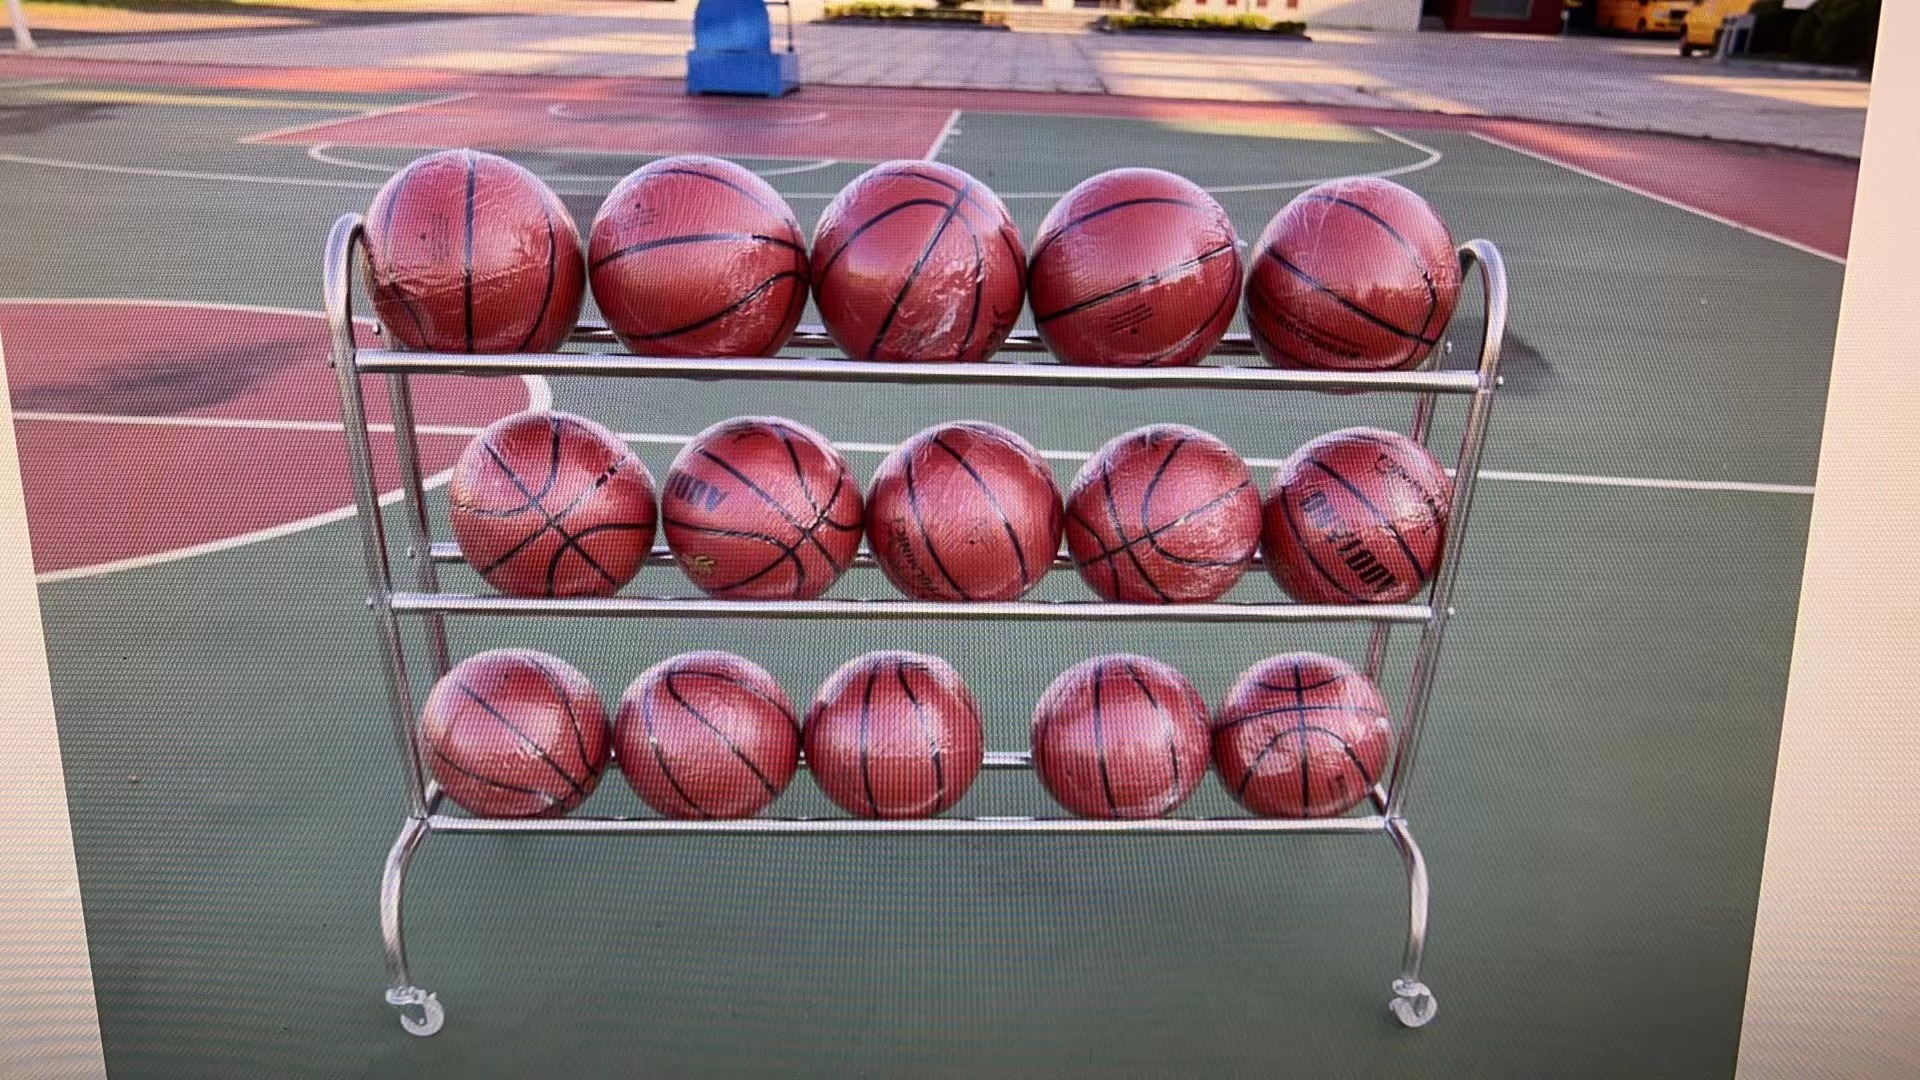 BASKETBALL STAINLESS STEEL Ball Cart 3 Level 15 Balls with Wheel